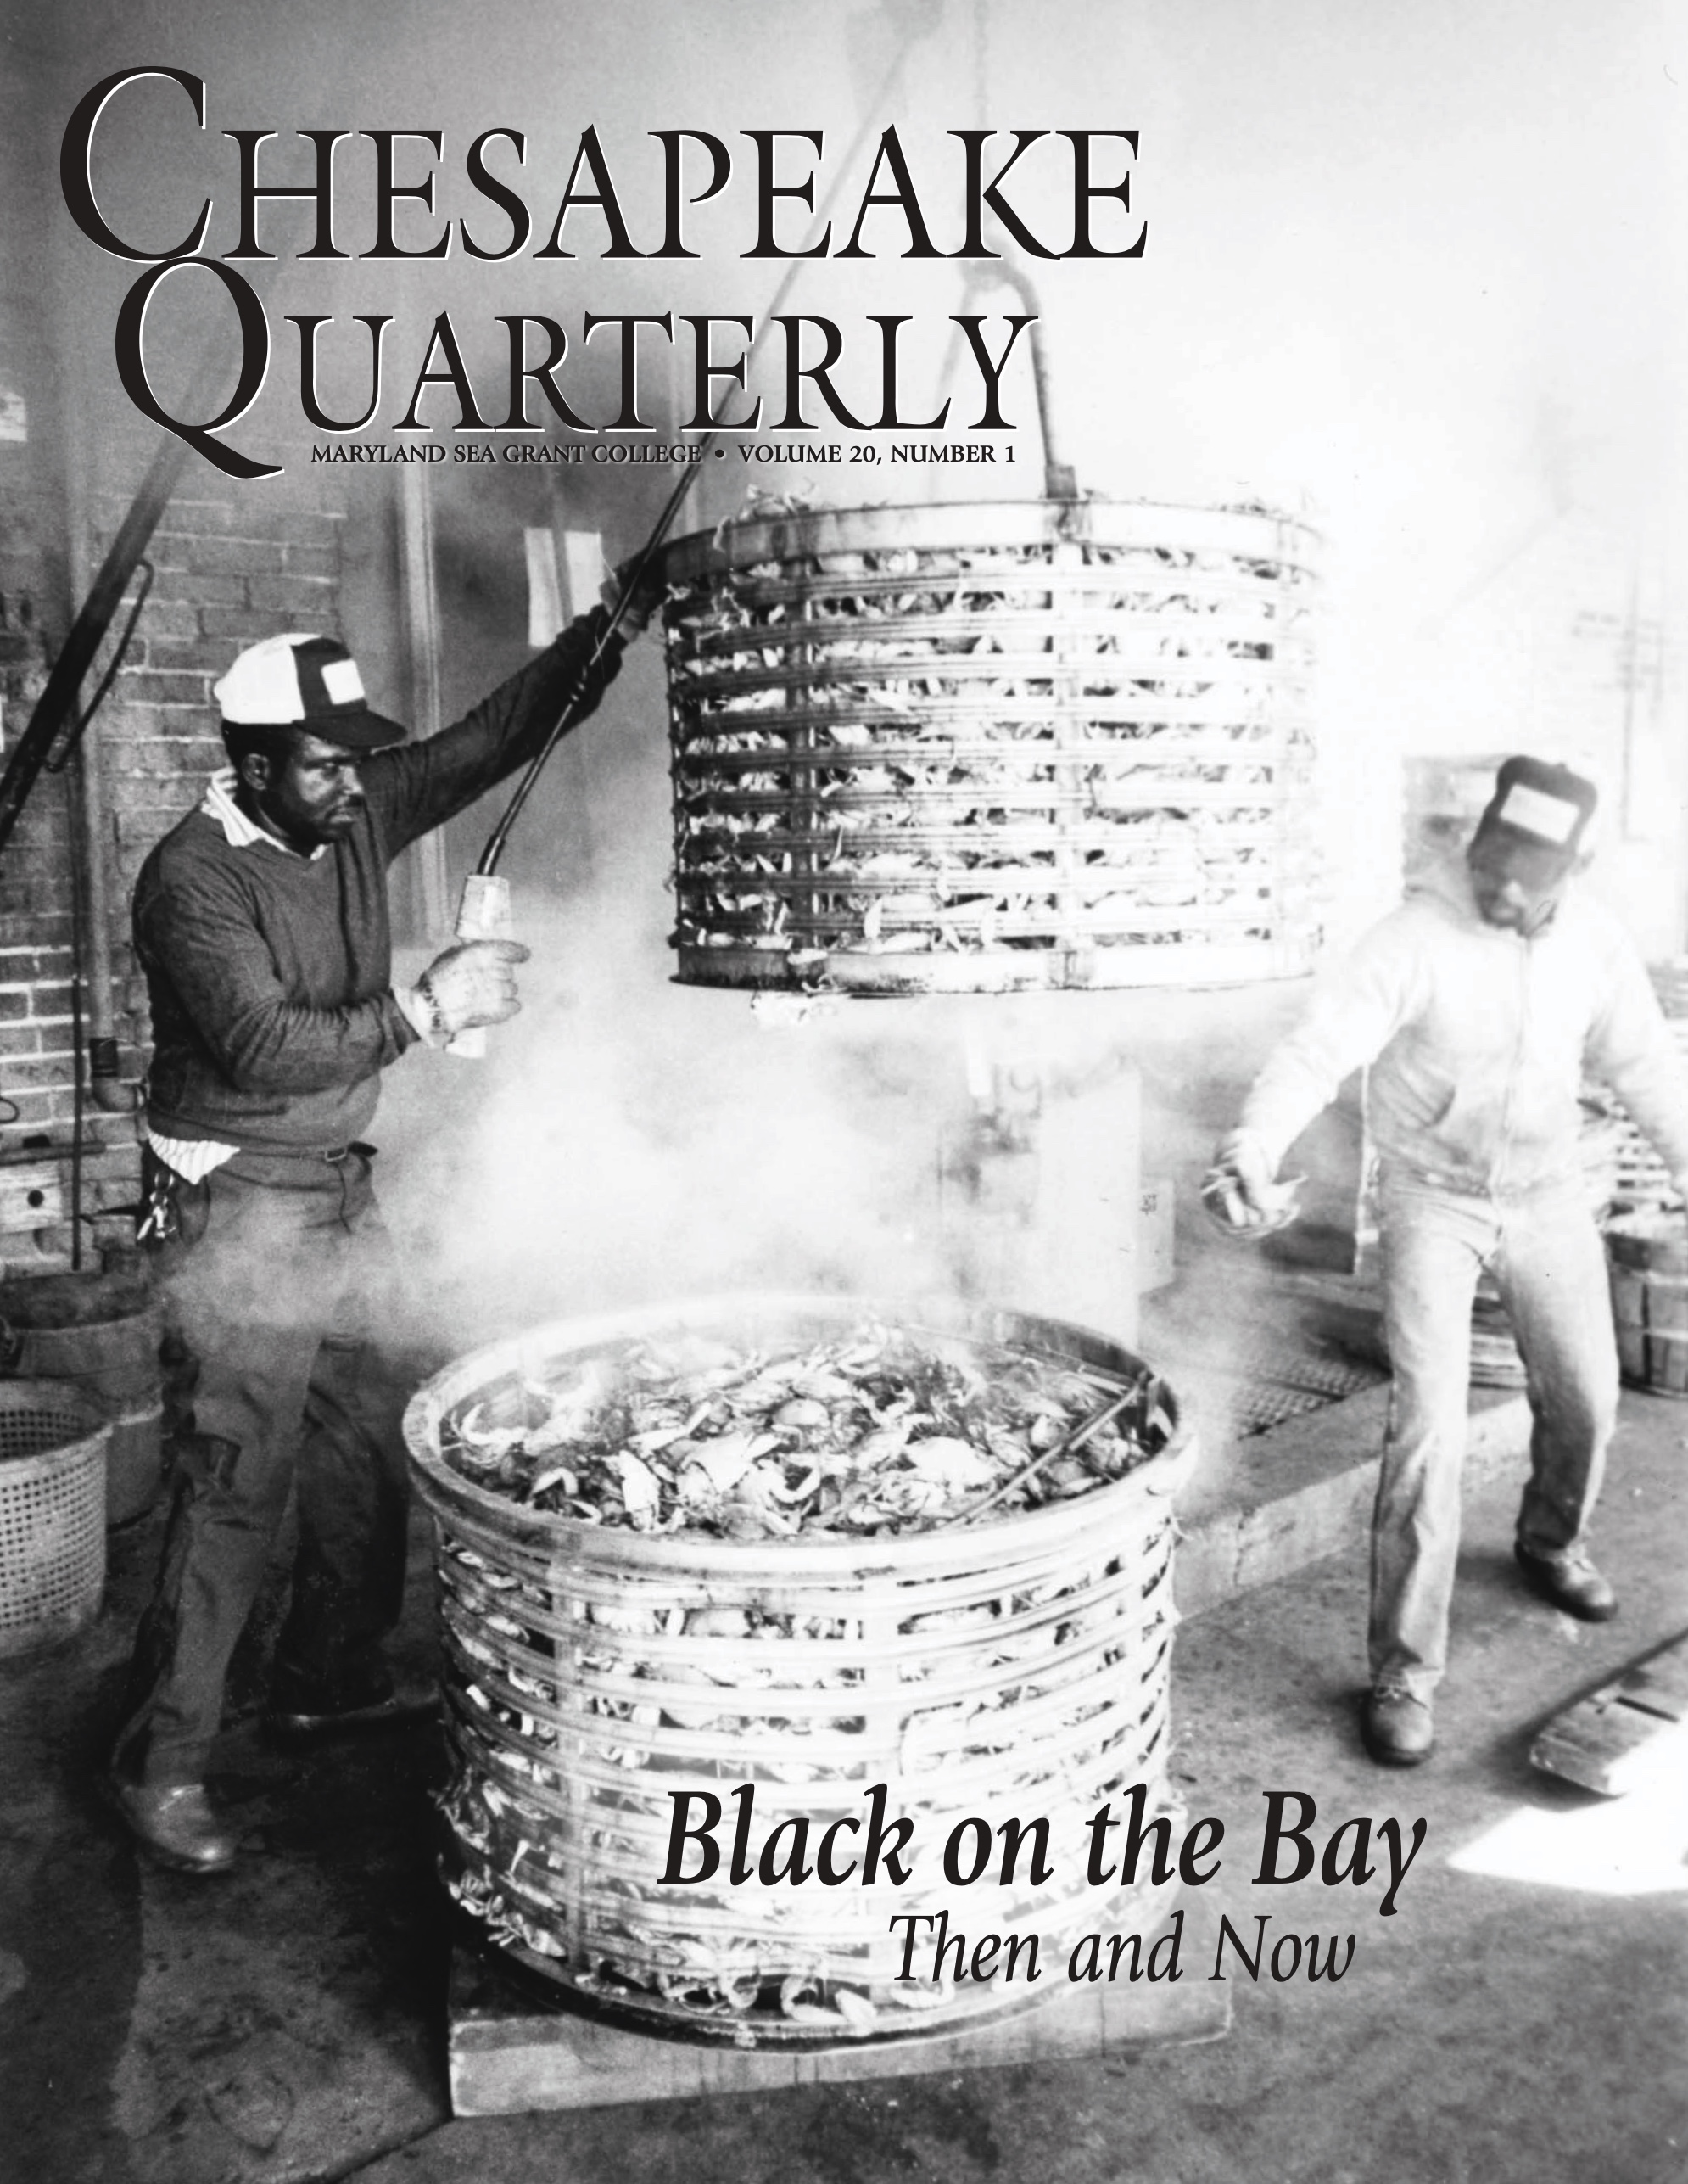 Men steaming crabs on Maryland’s Eastern Shore. Photo, Maryland Sea Grant College